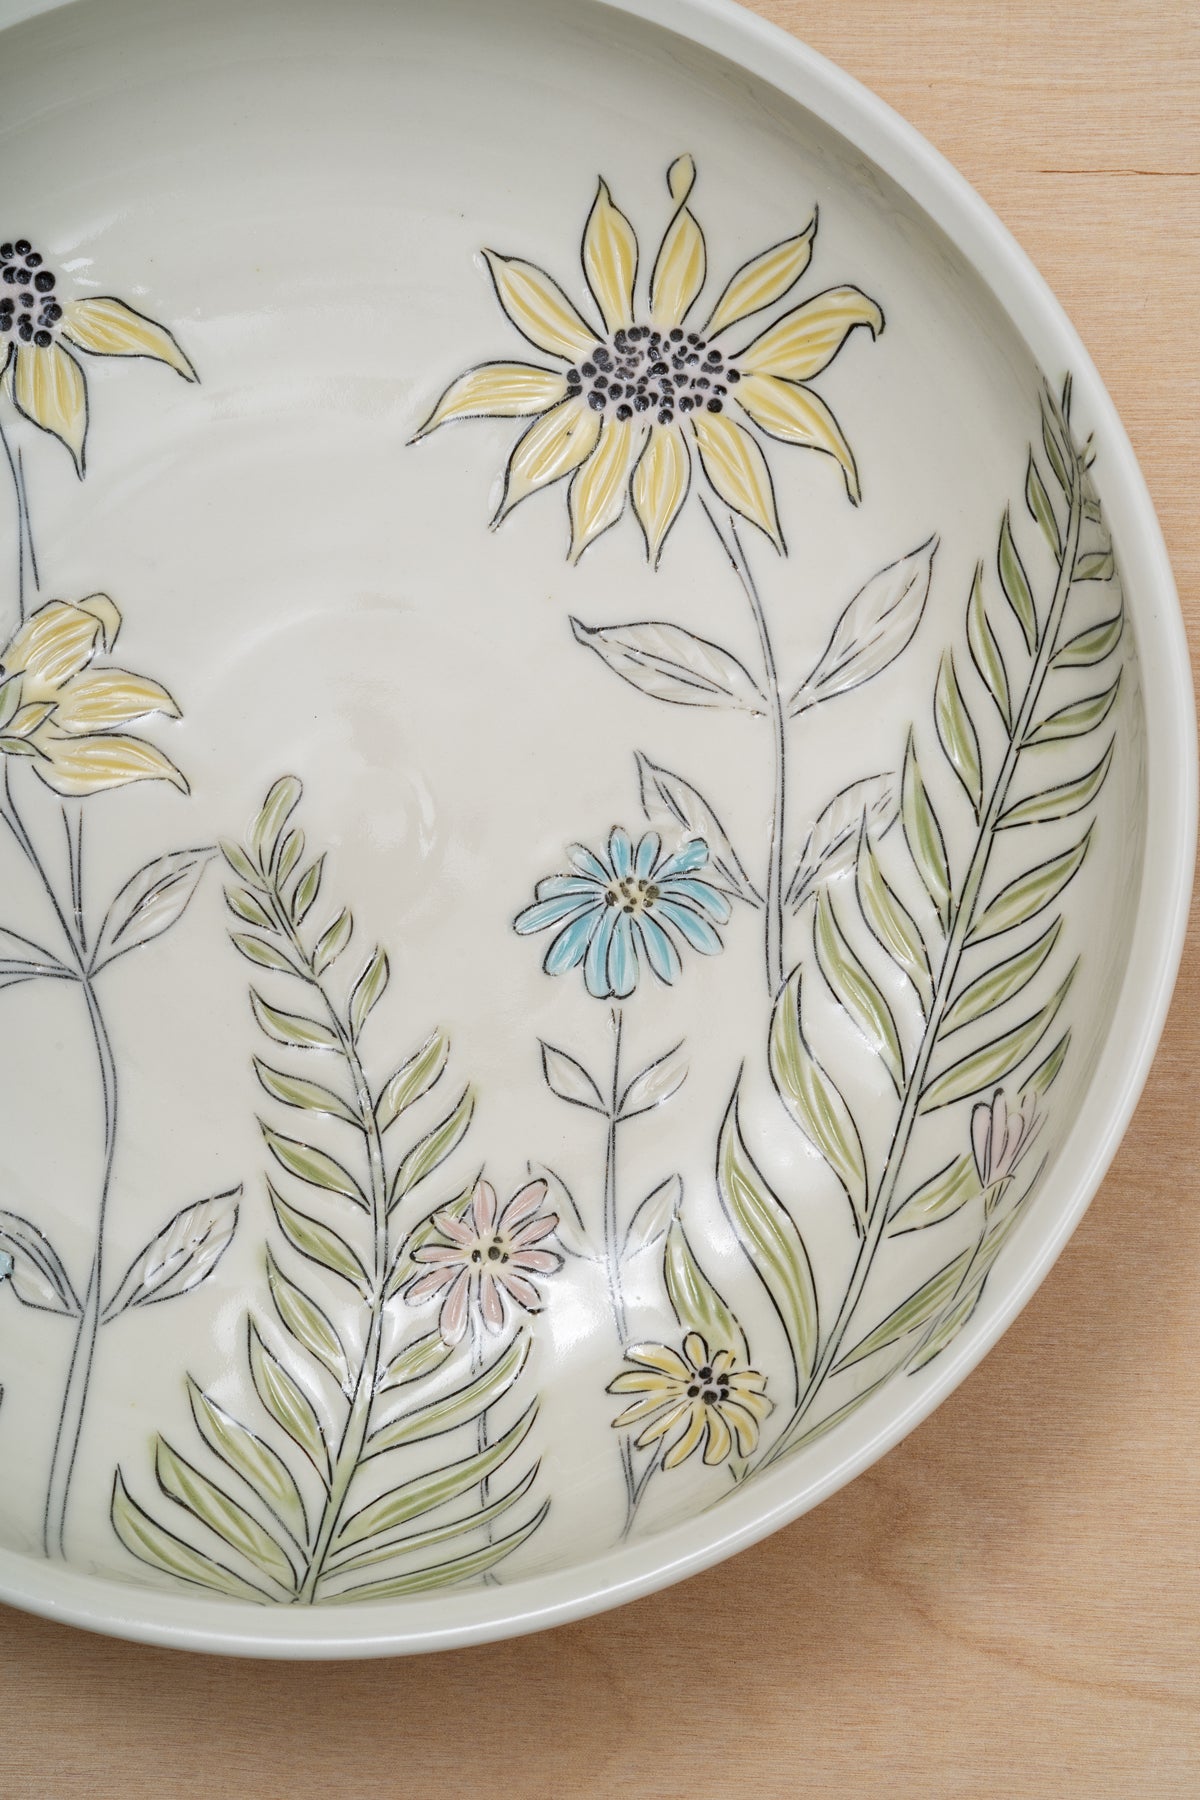 A close up of a serving bowl by artist Julie Wiggins with multicolored floral inlay viewed from above on a light wood table. Image by Loam